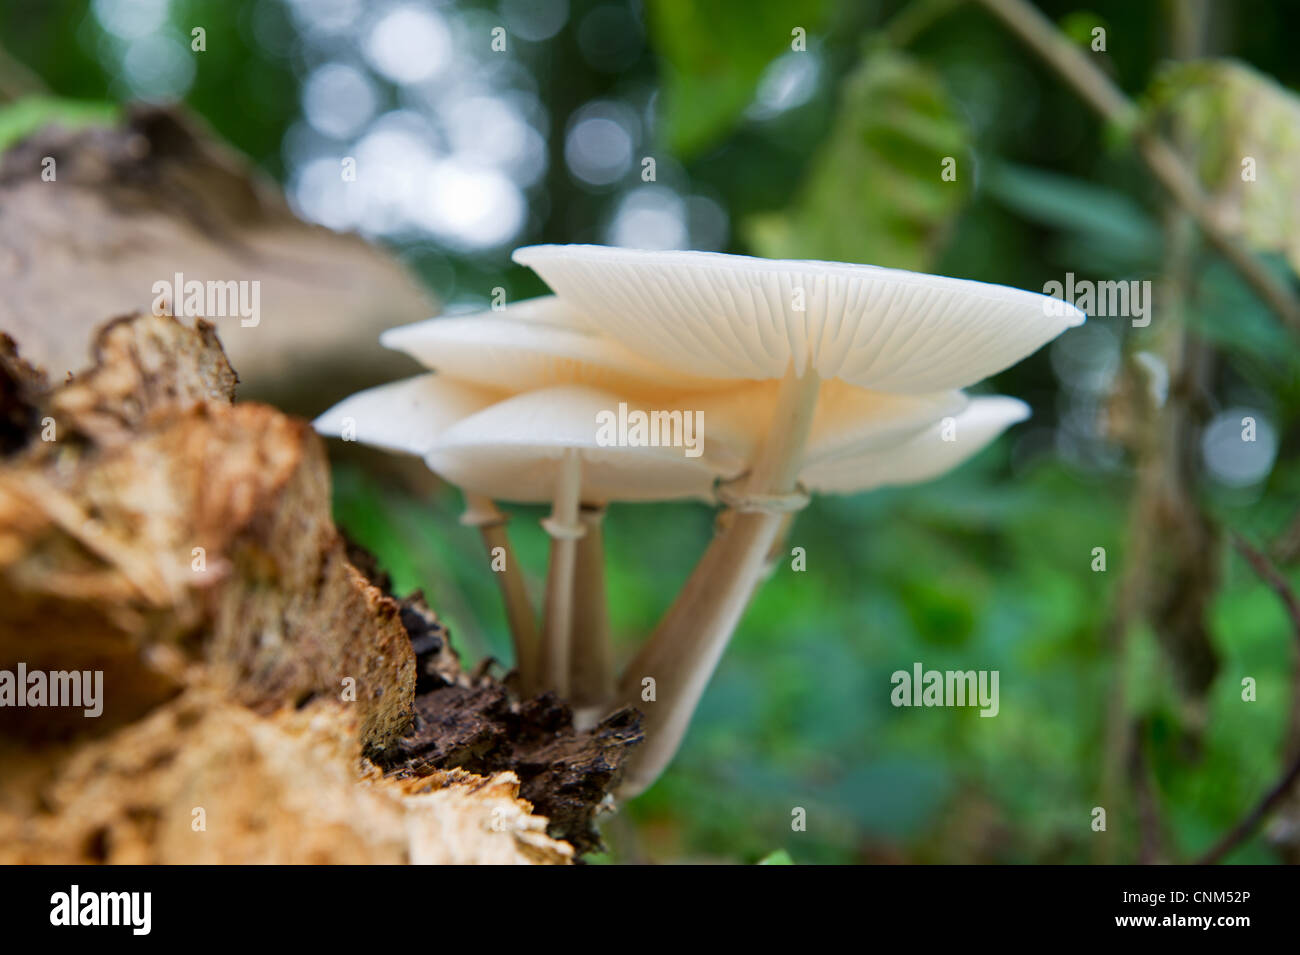 White gilled mushrooms in the autumn forest Stock Photo